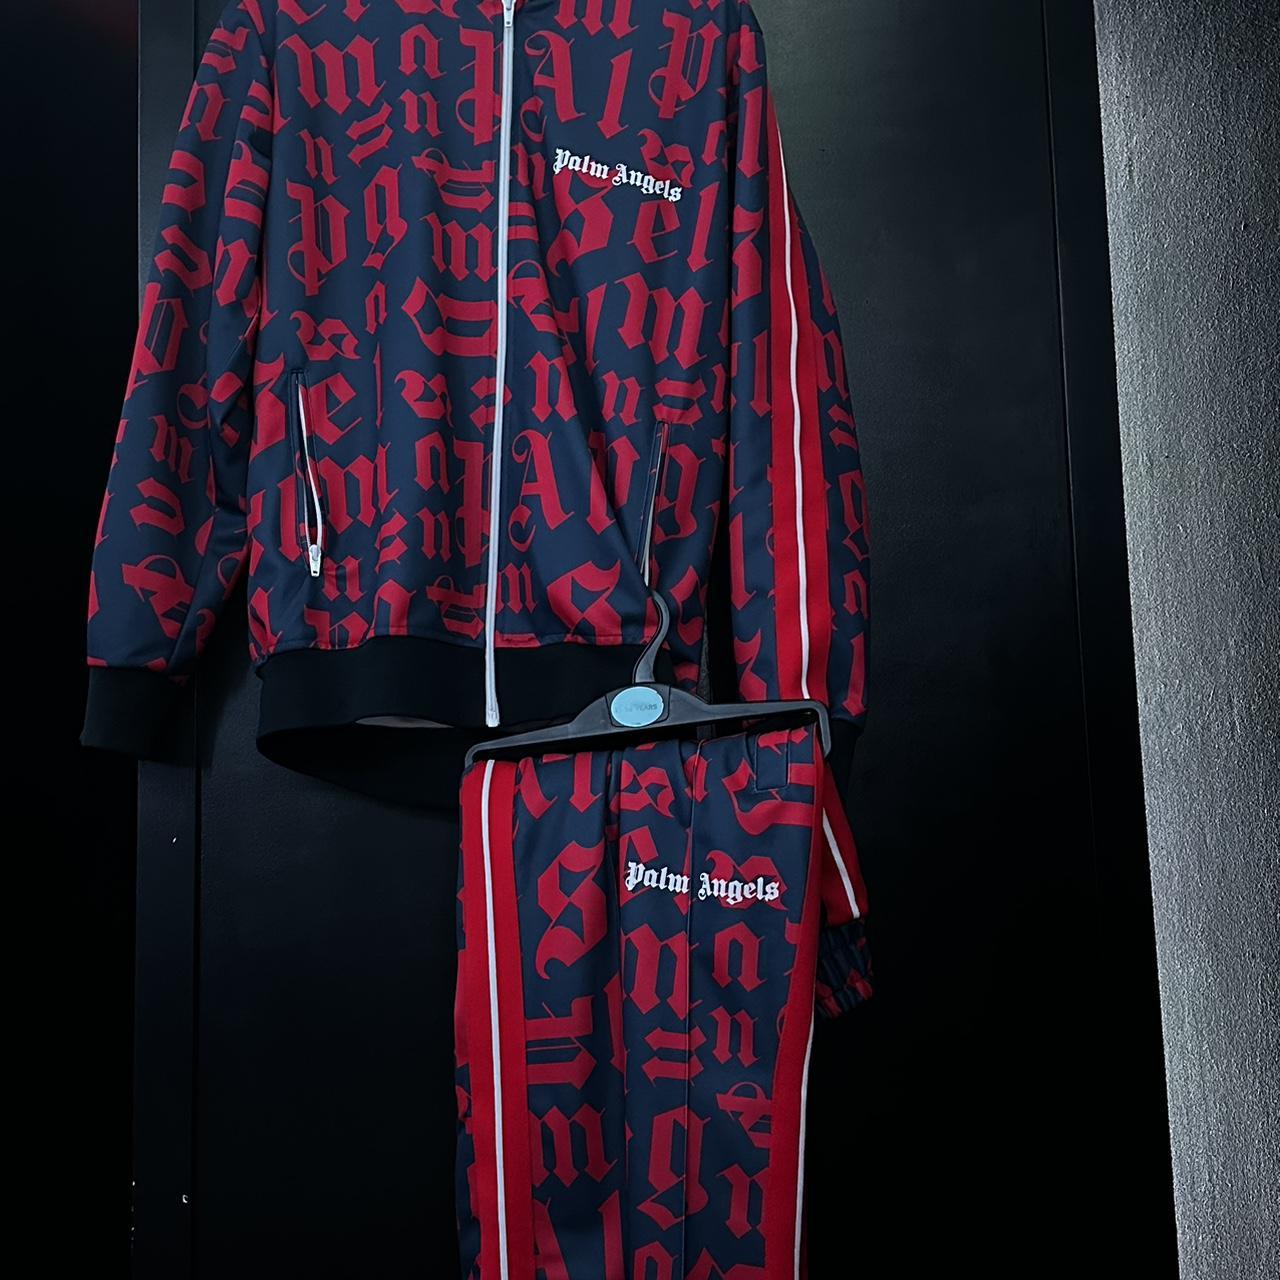 Palm Angel Designer Mens Zip Up Hoodies: Unisex Tracksuit Set In Blue And  Red From Zjxzhuzhu55, $44.88